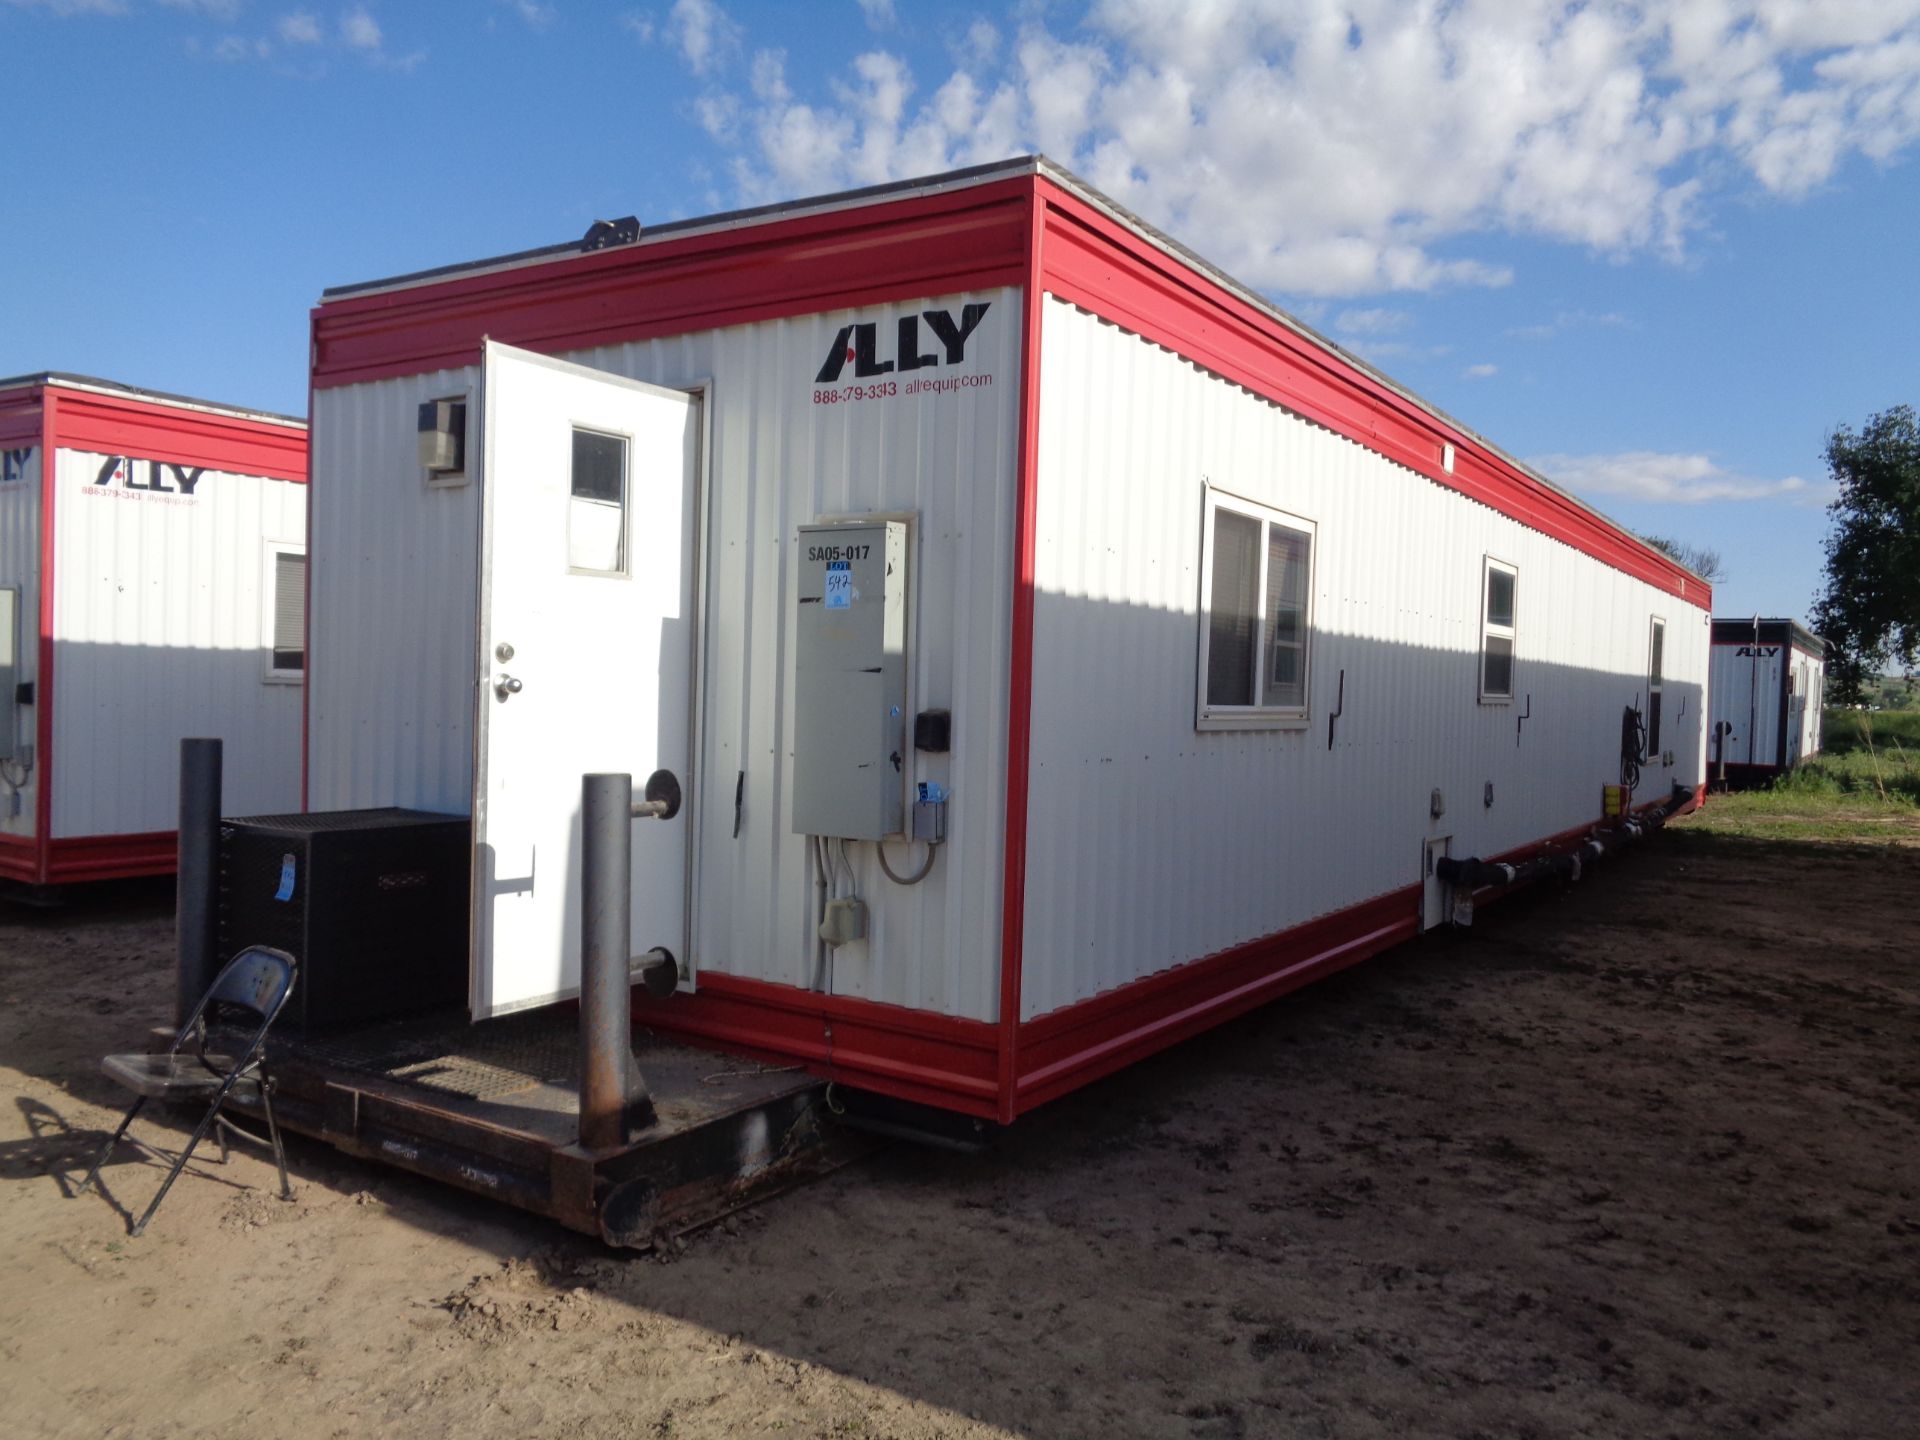 ATCO MODEL 12 X 58 BC, RM, TP WITH BUNK BEDS ACCOMMODATION UNIT; BUILT 2011, S/N 258117060, (2)